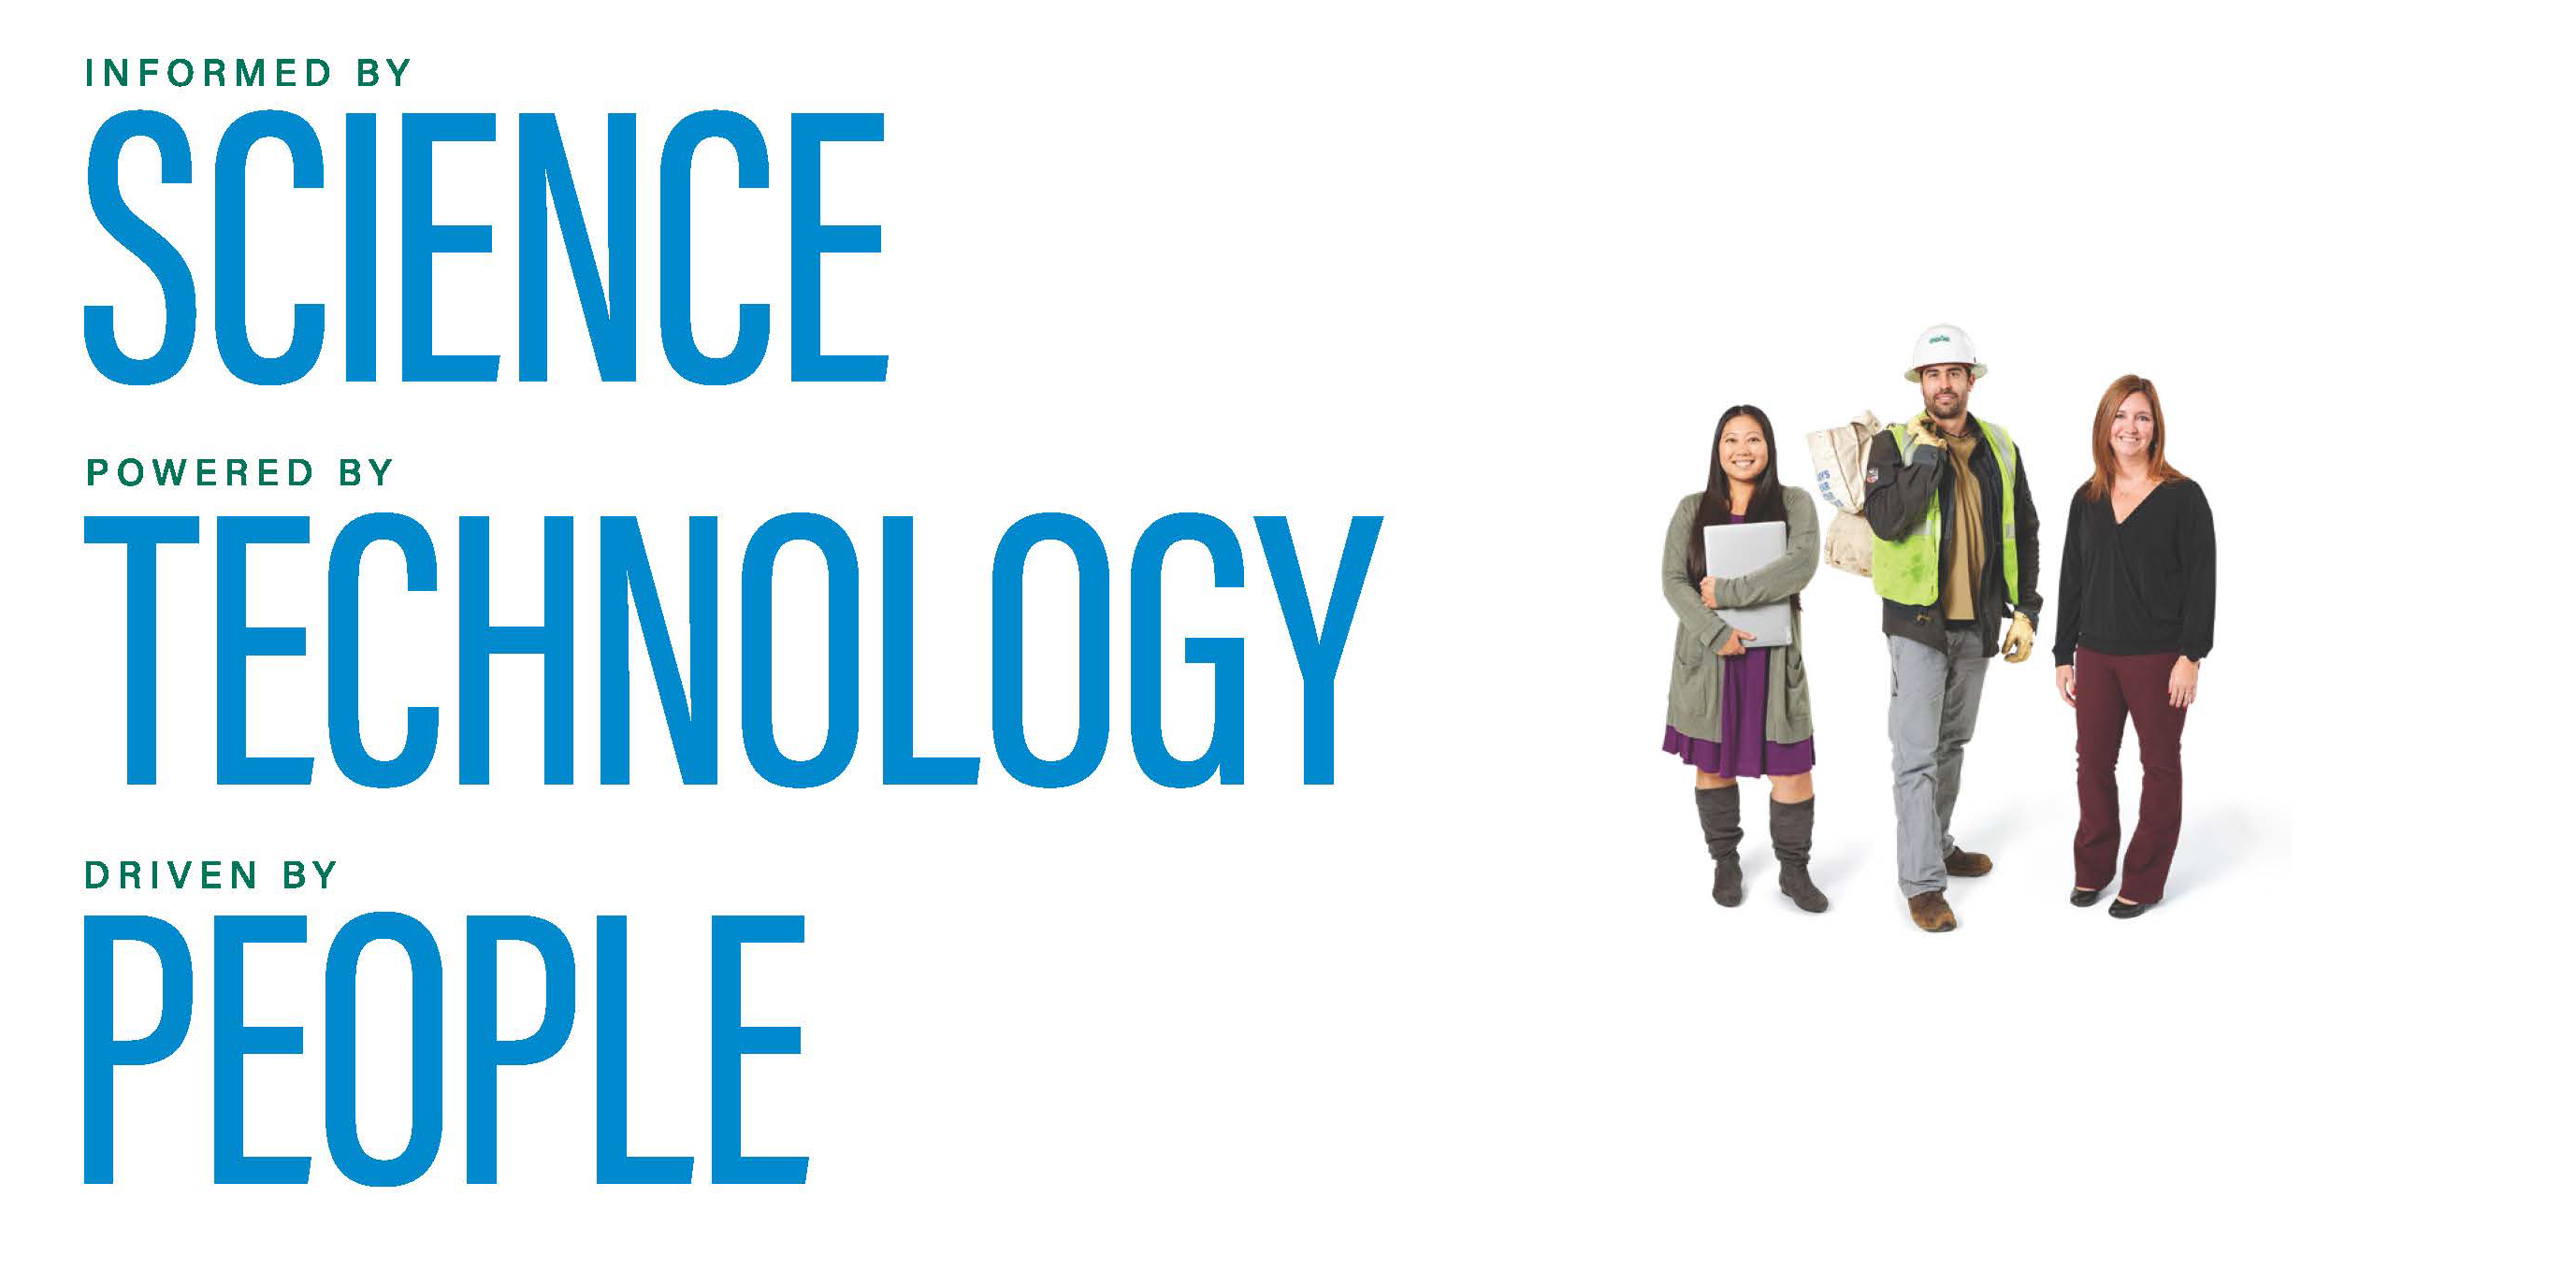 Science Technology People three mge employees standing on white background